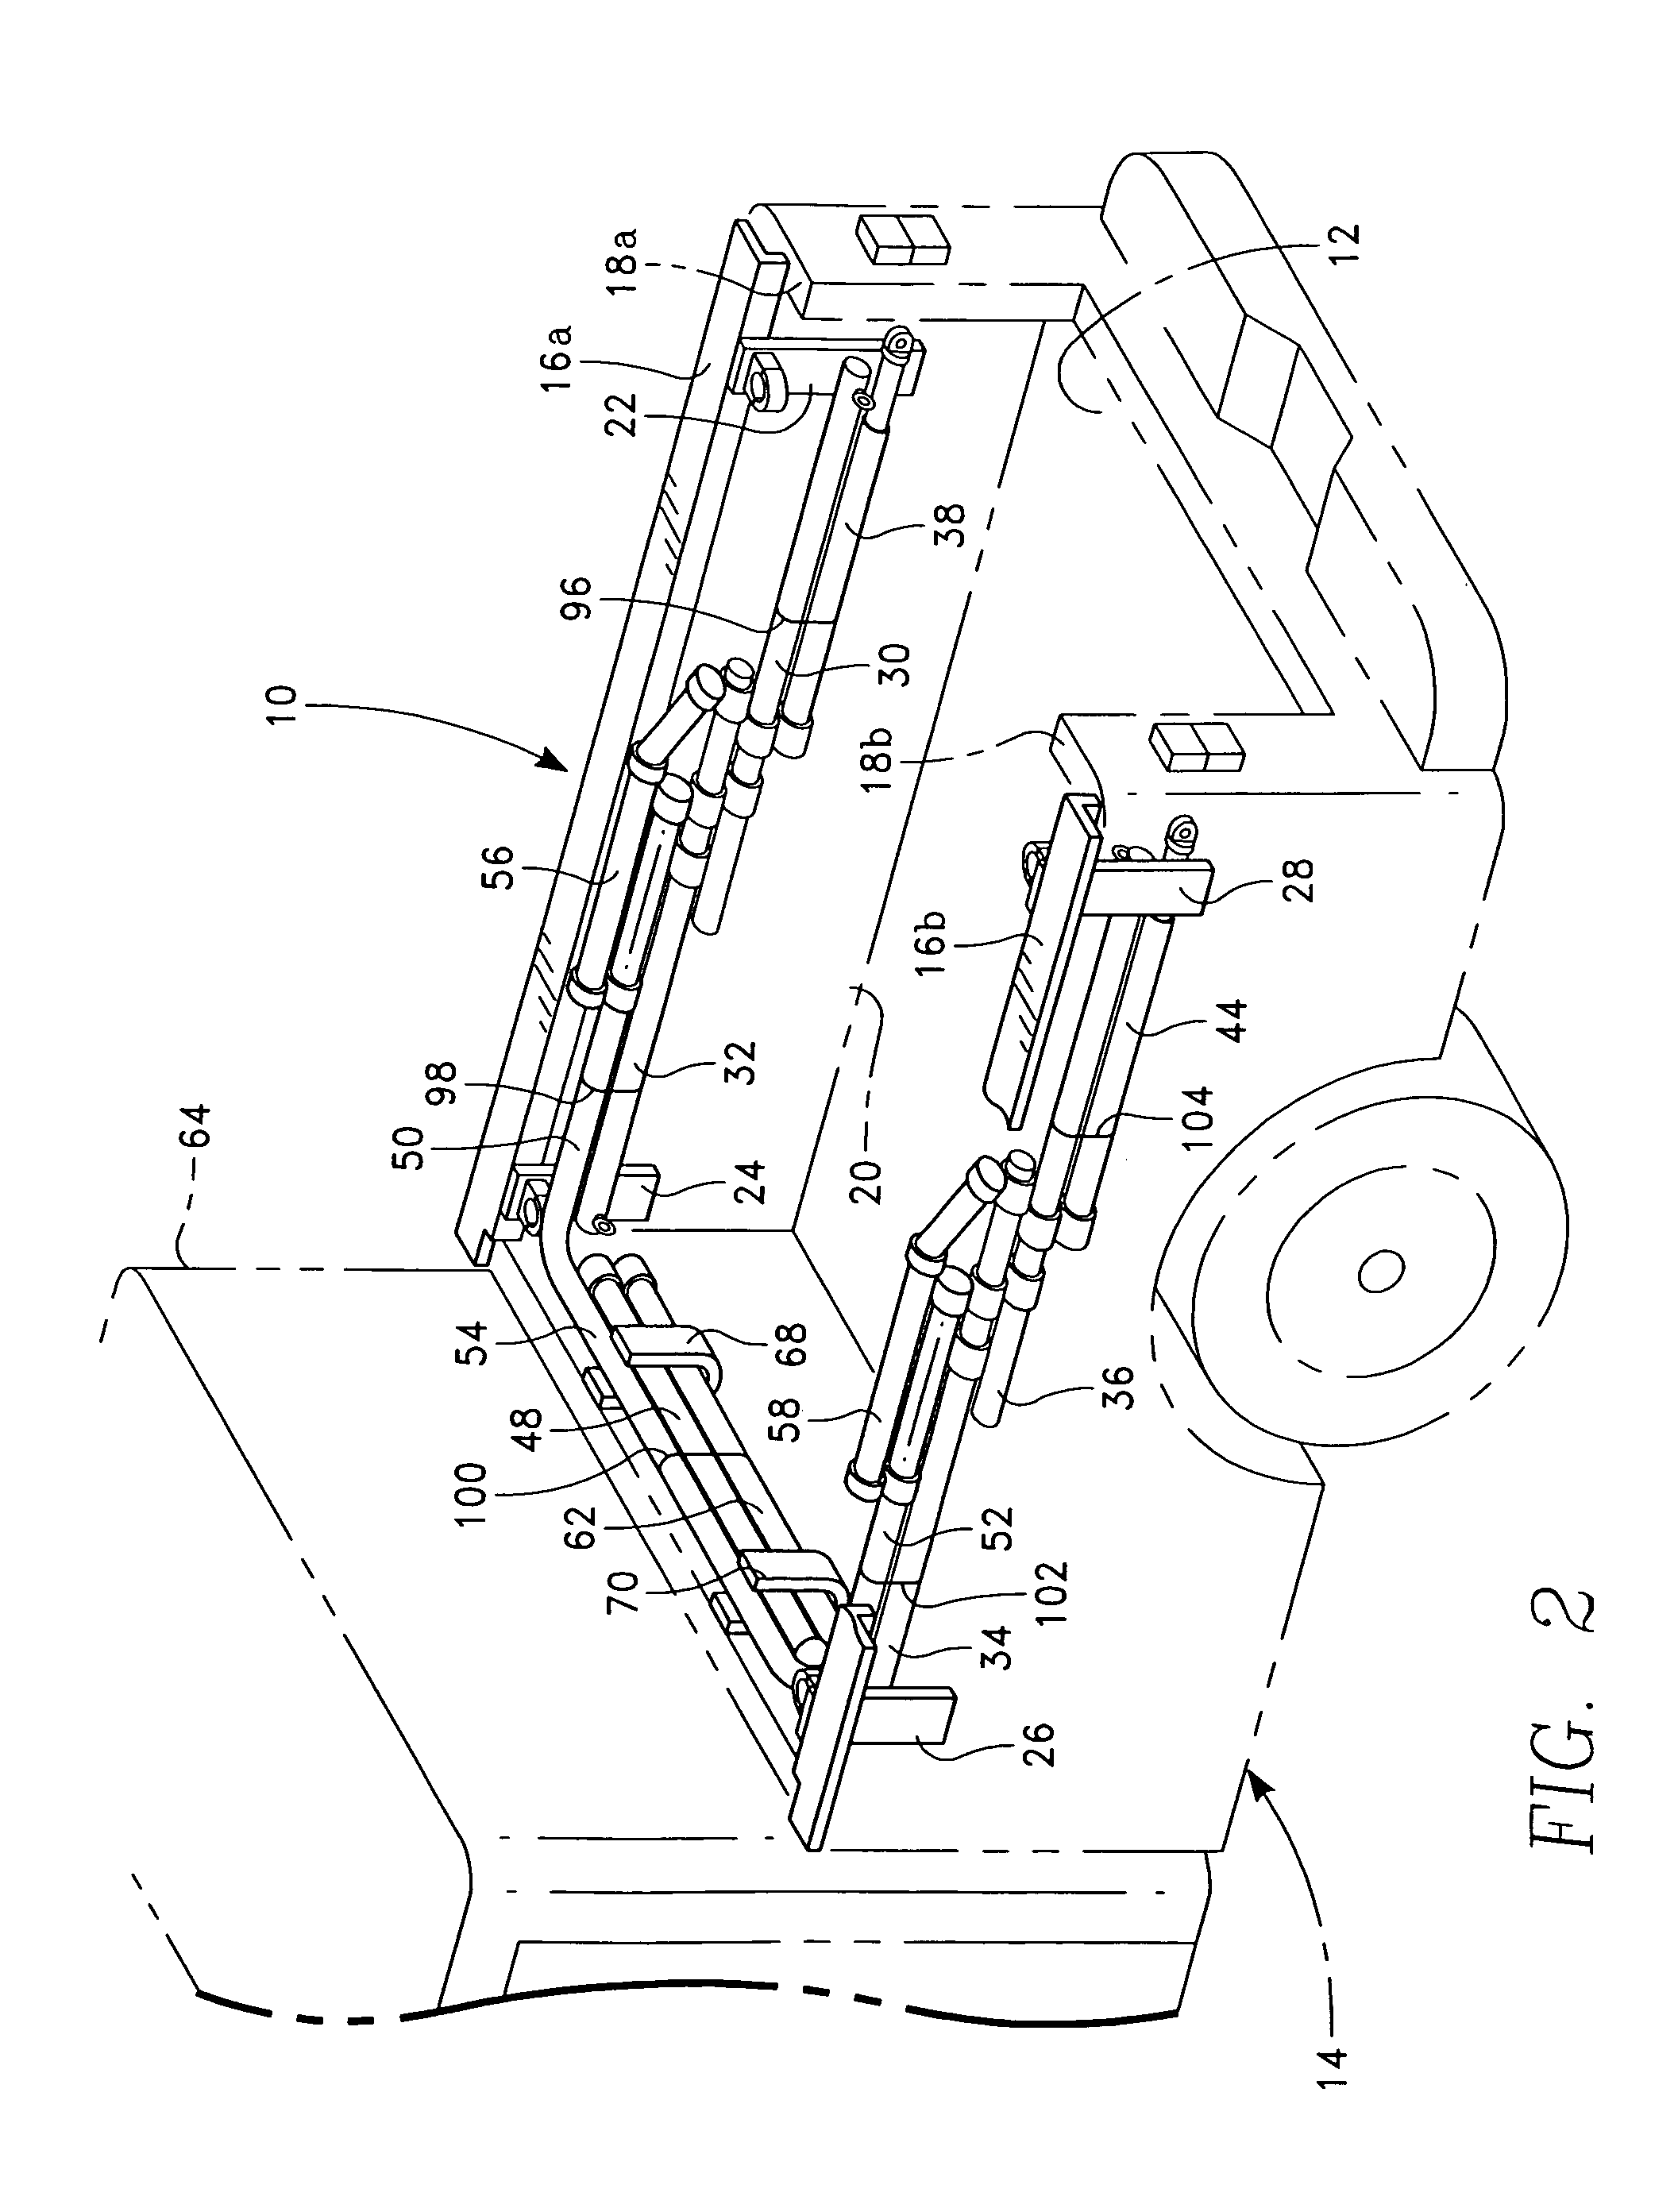 Collapsible truck rack and method of use